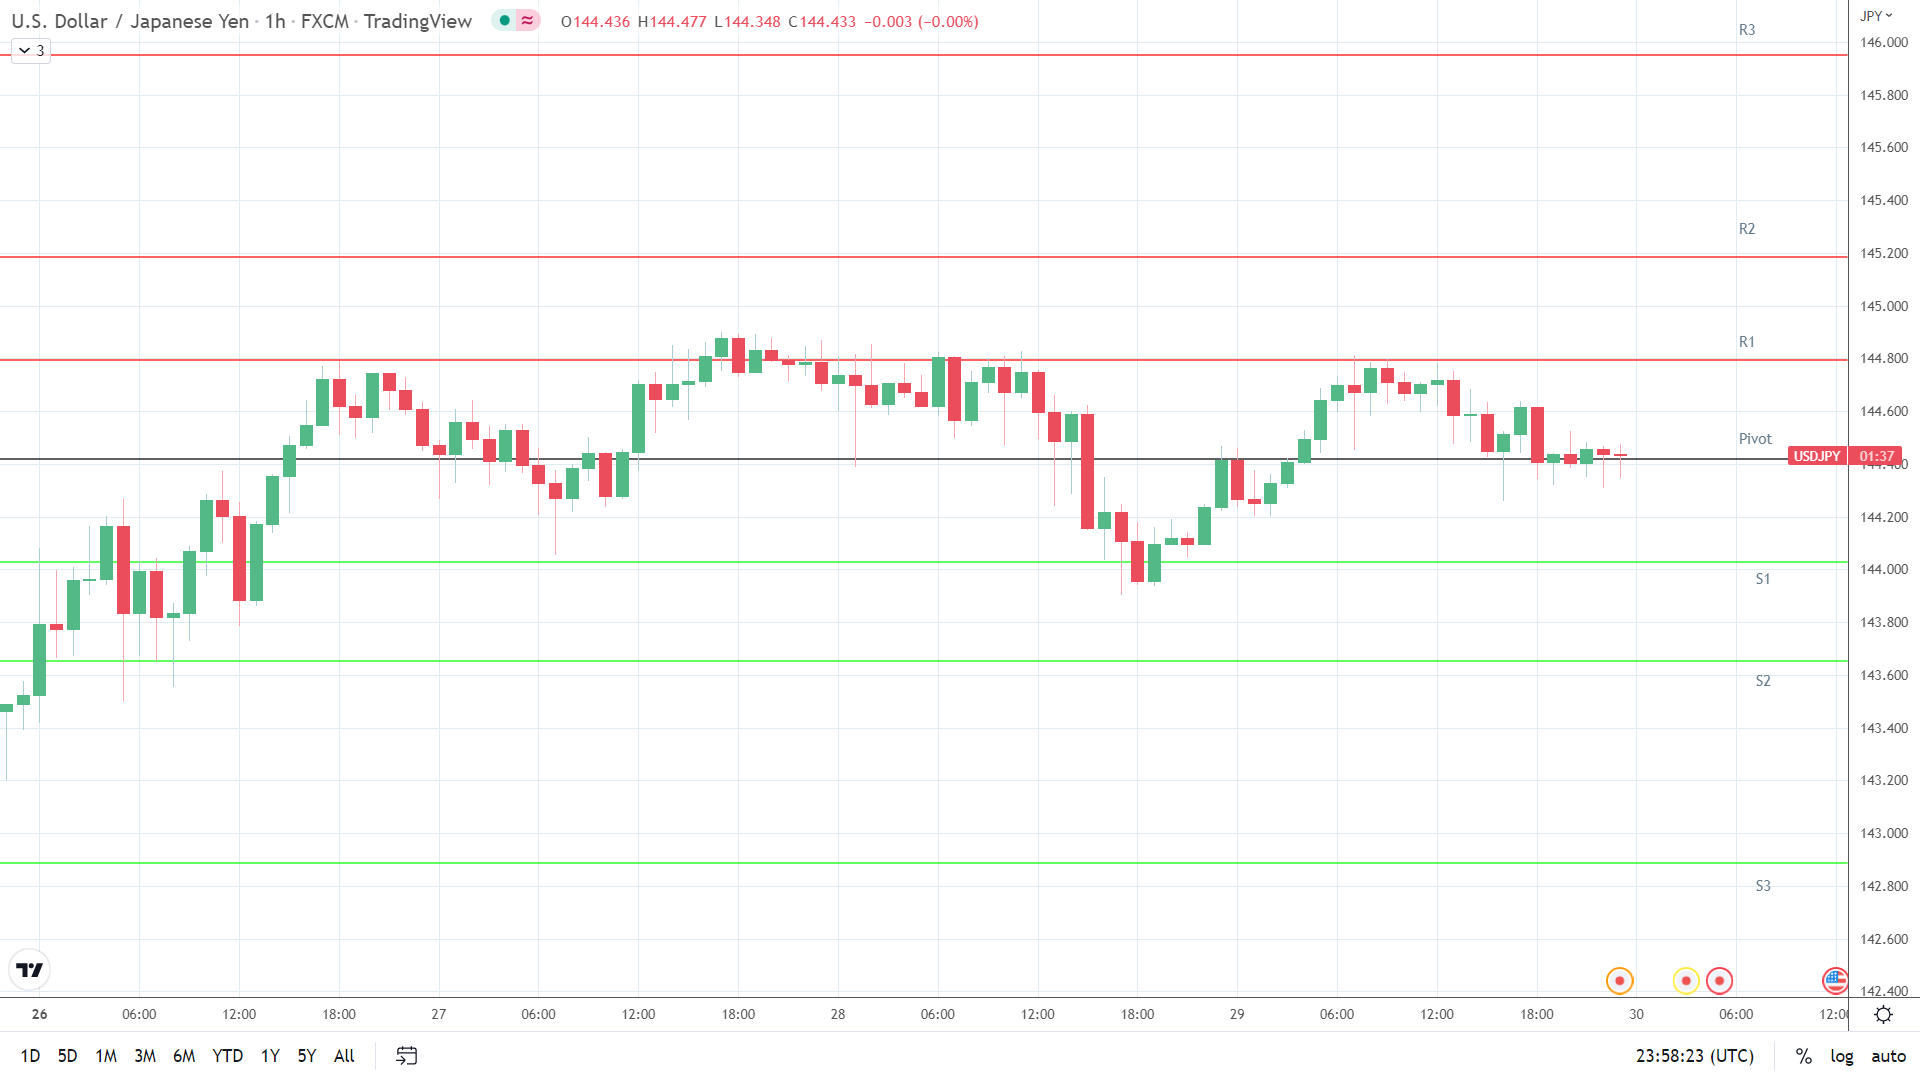 USDJPY resistance levels in play above the pivot.